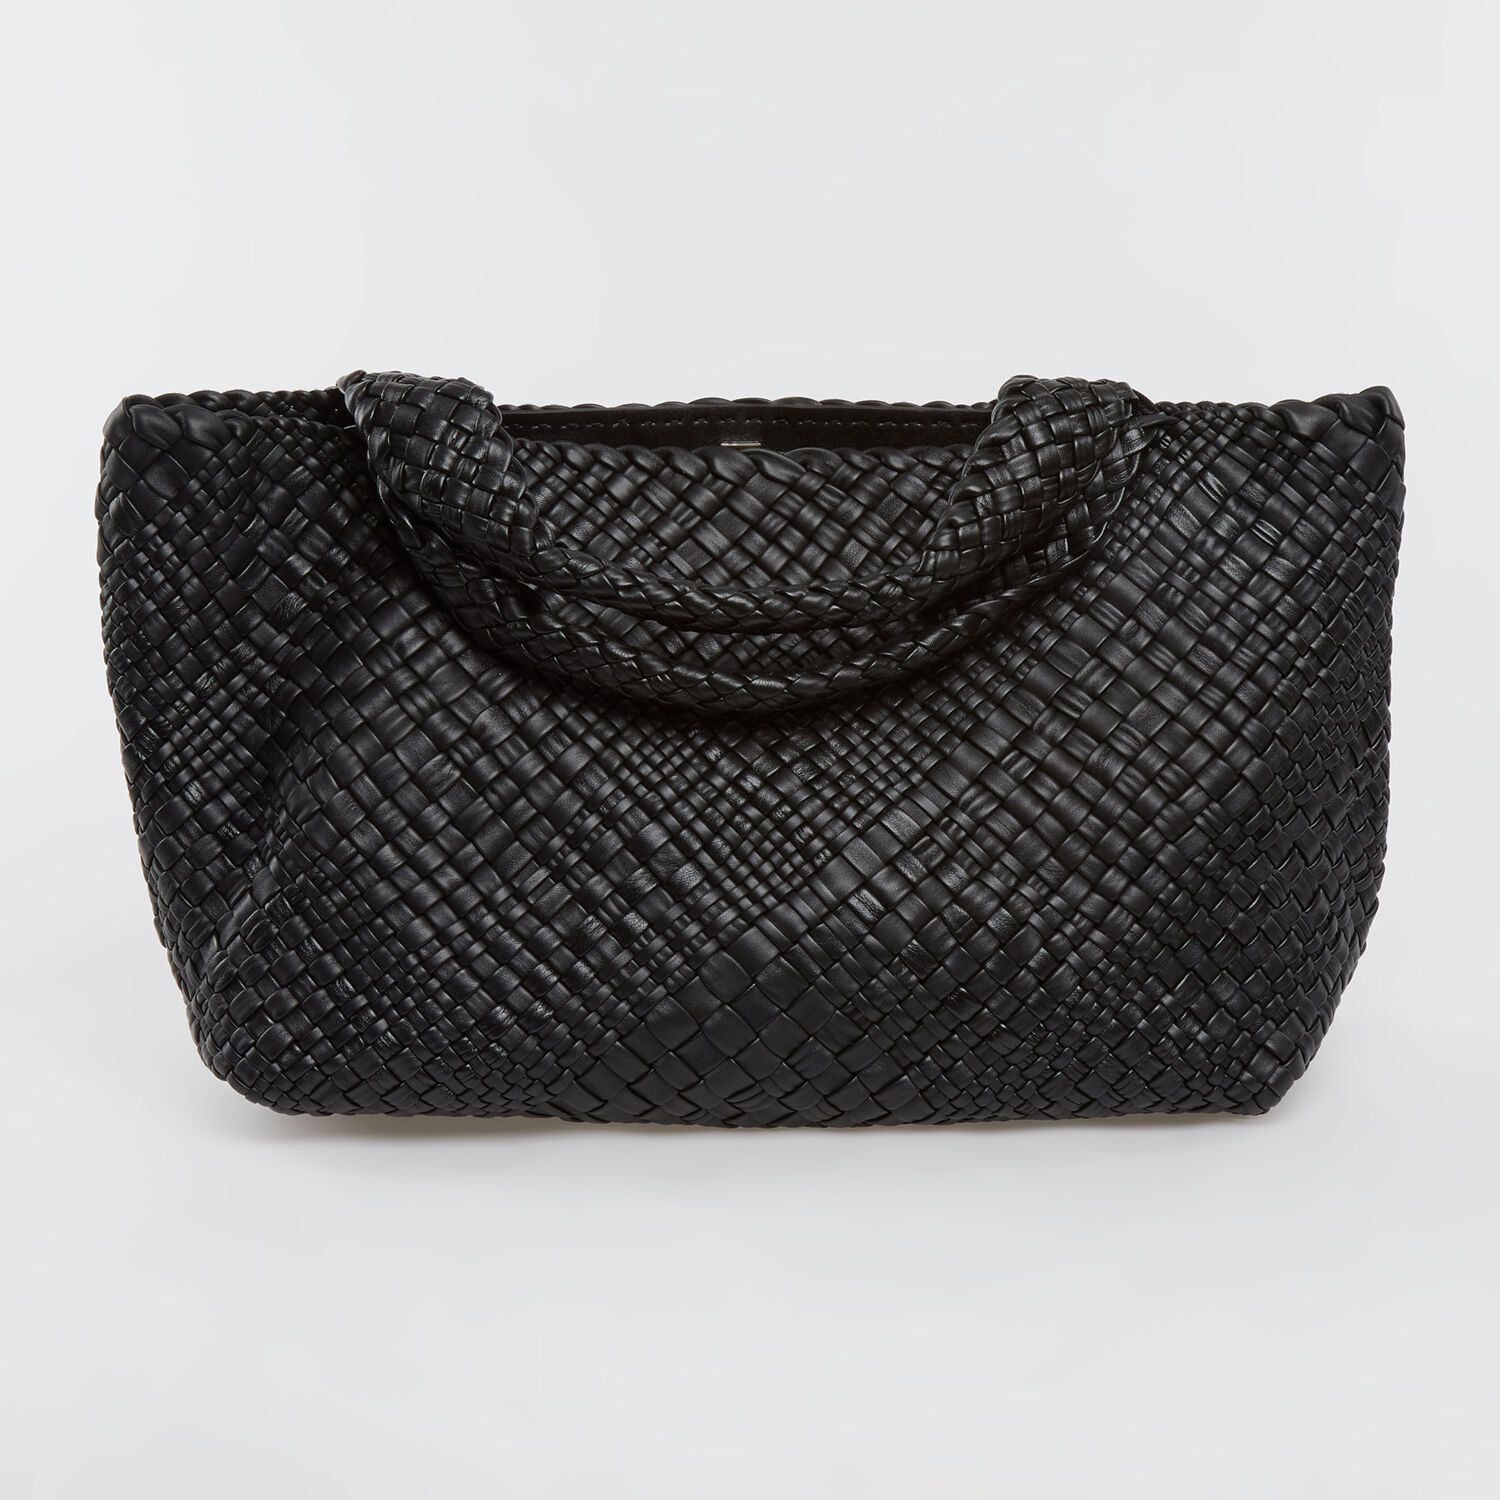 WOVEN LEATHER TOTE BAG - Black